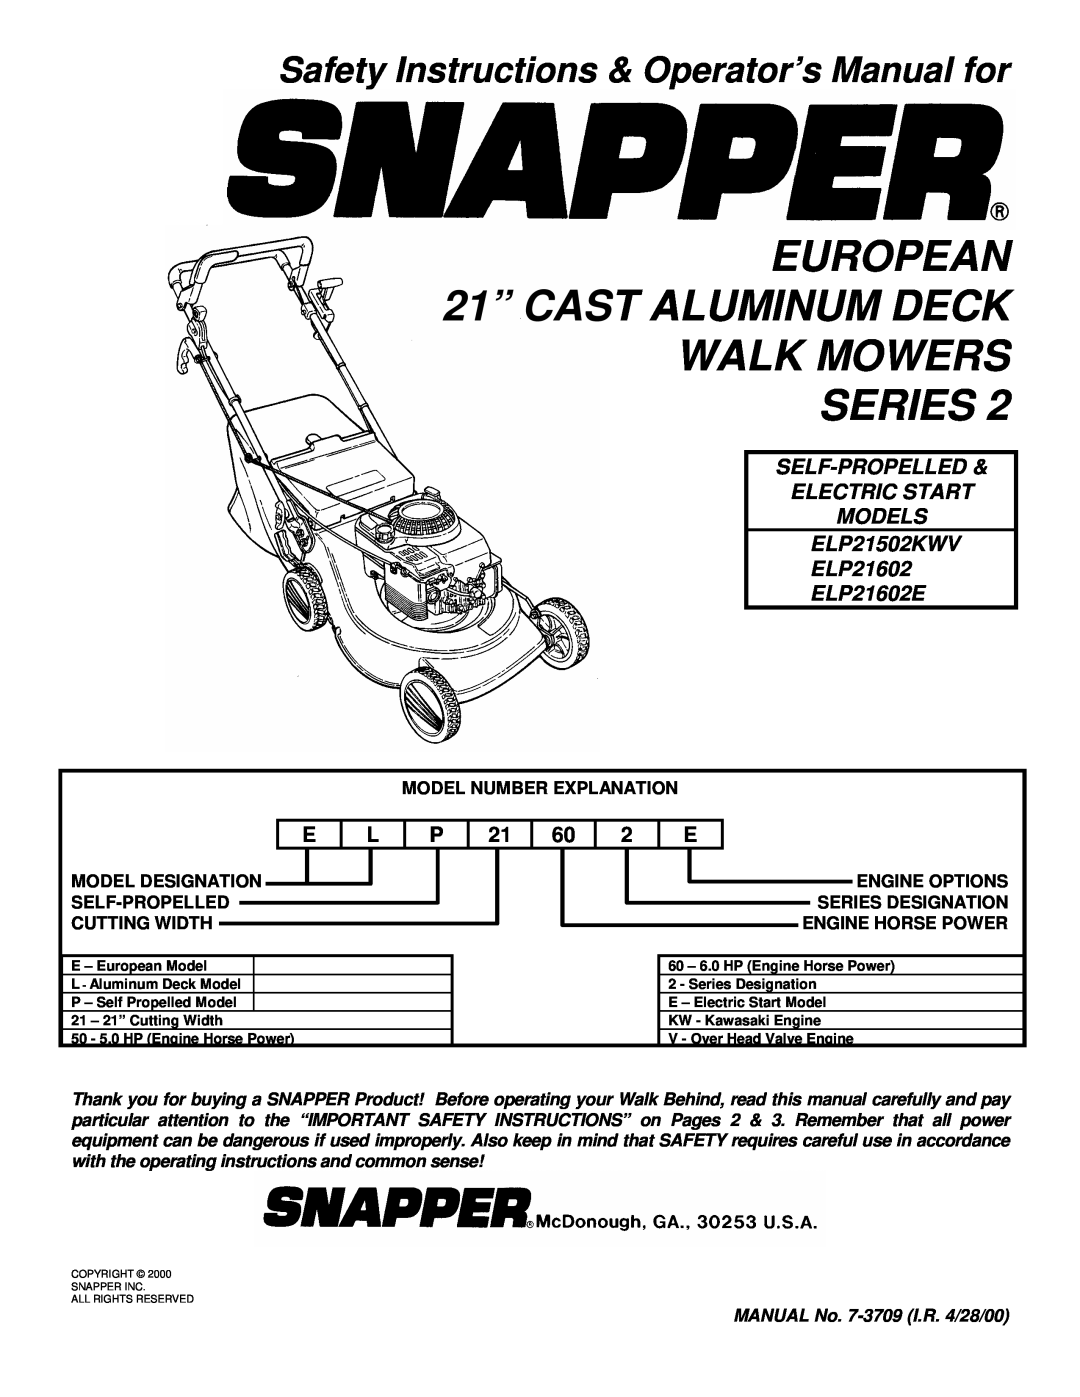 Snapper ELP21502KWV, ELP21602, ELP21602E important safety instructions Safety Instructions & Operator’s Manual for 